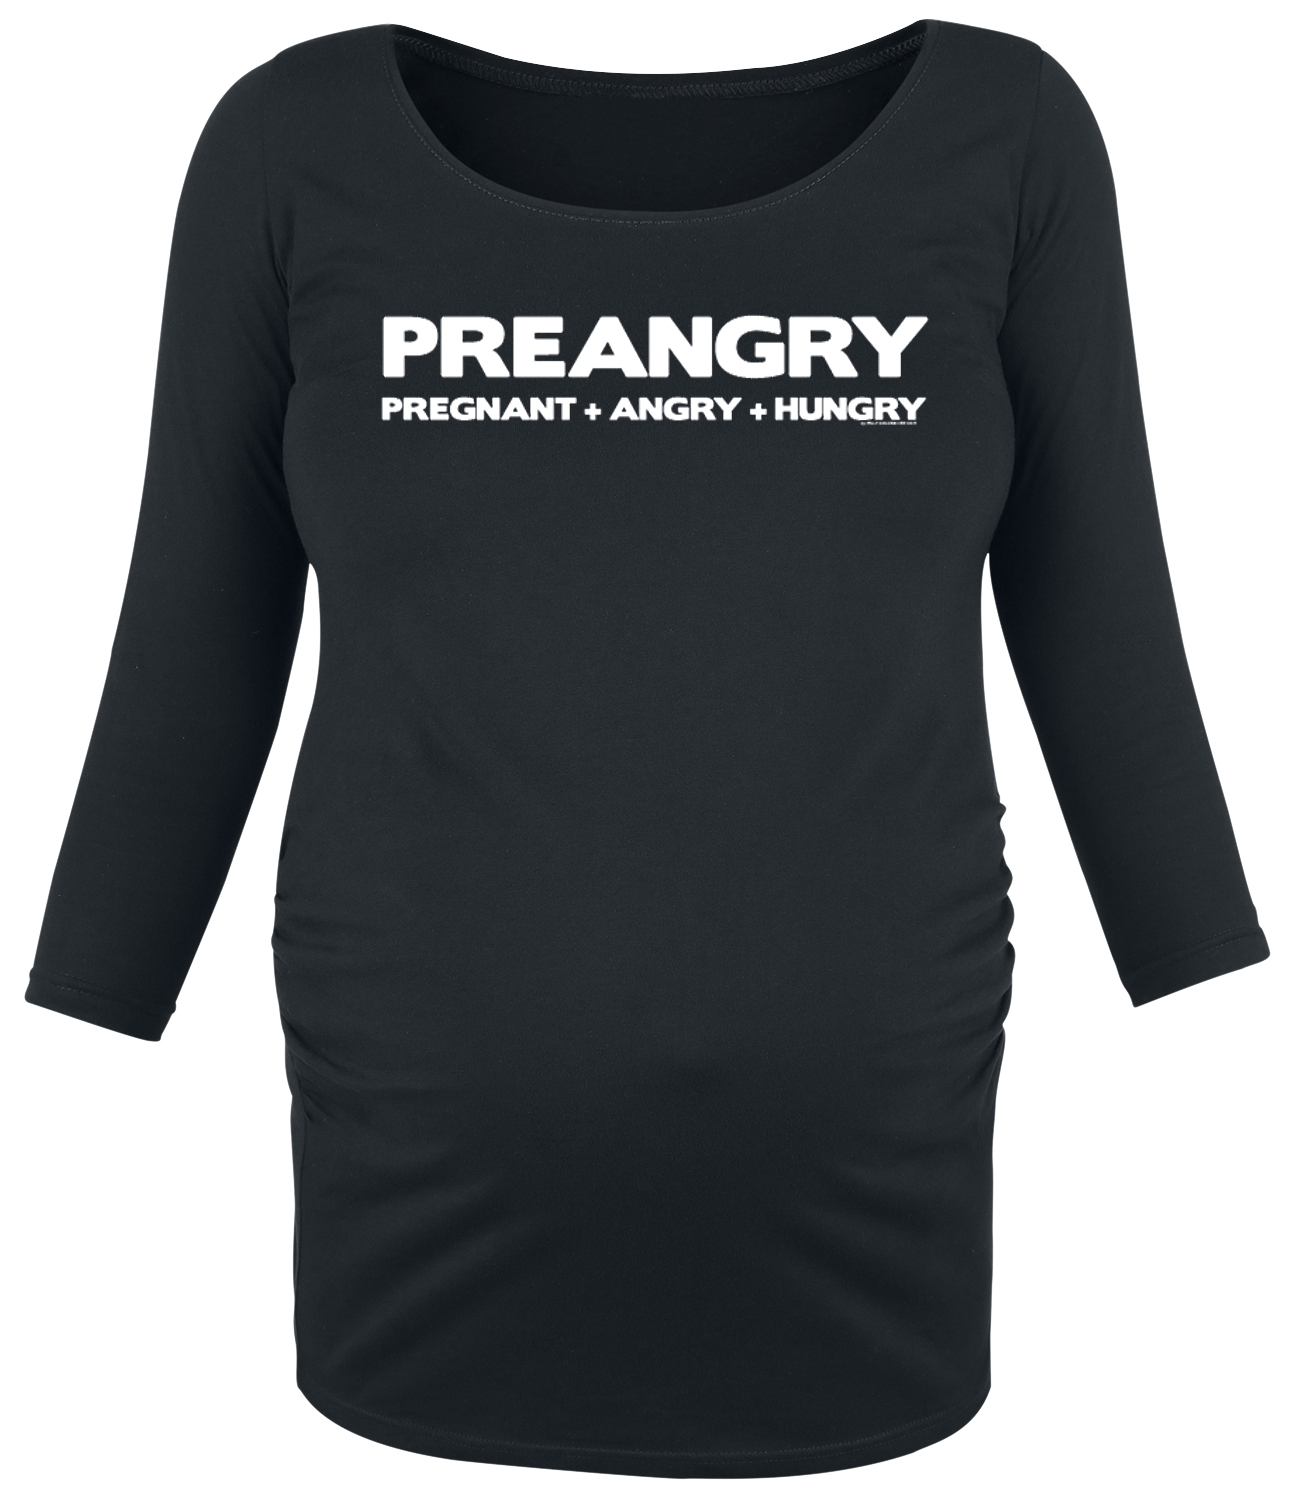 Maternity fashion - Preangry Pregnant + Angry + Hungry - Girls longsleeve - black image